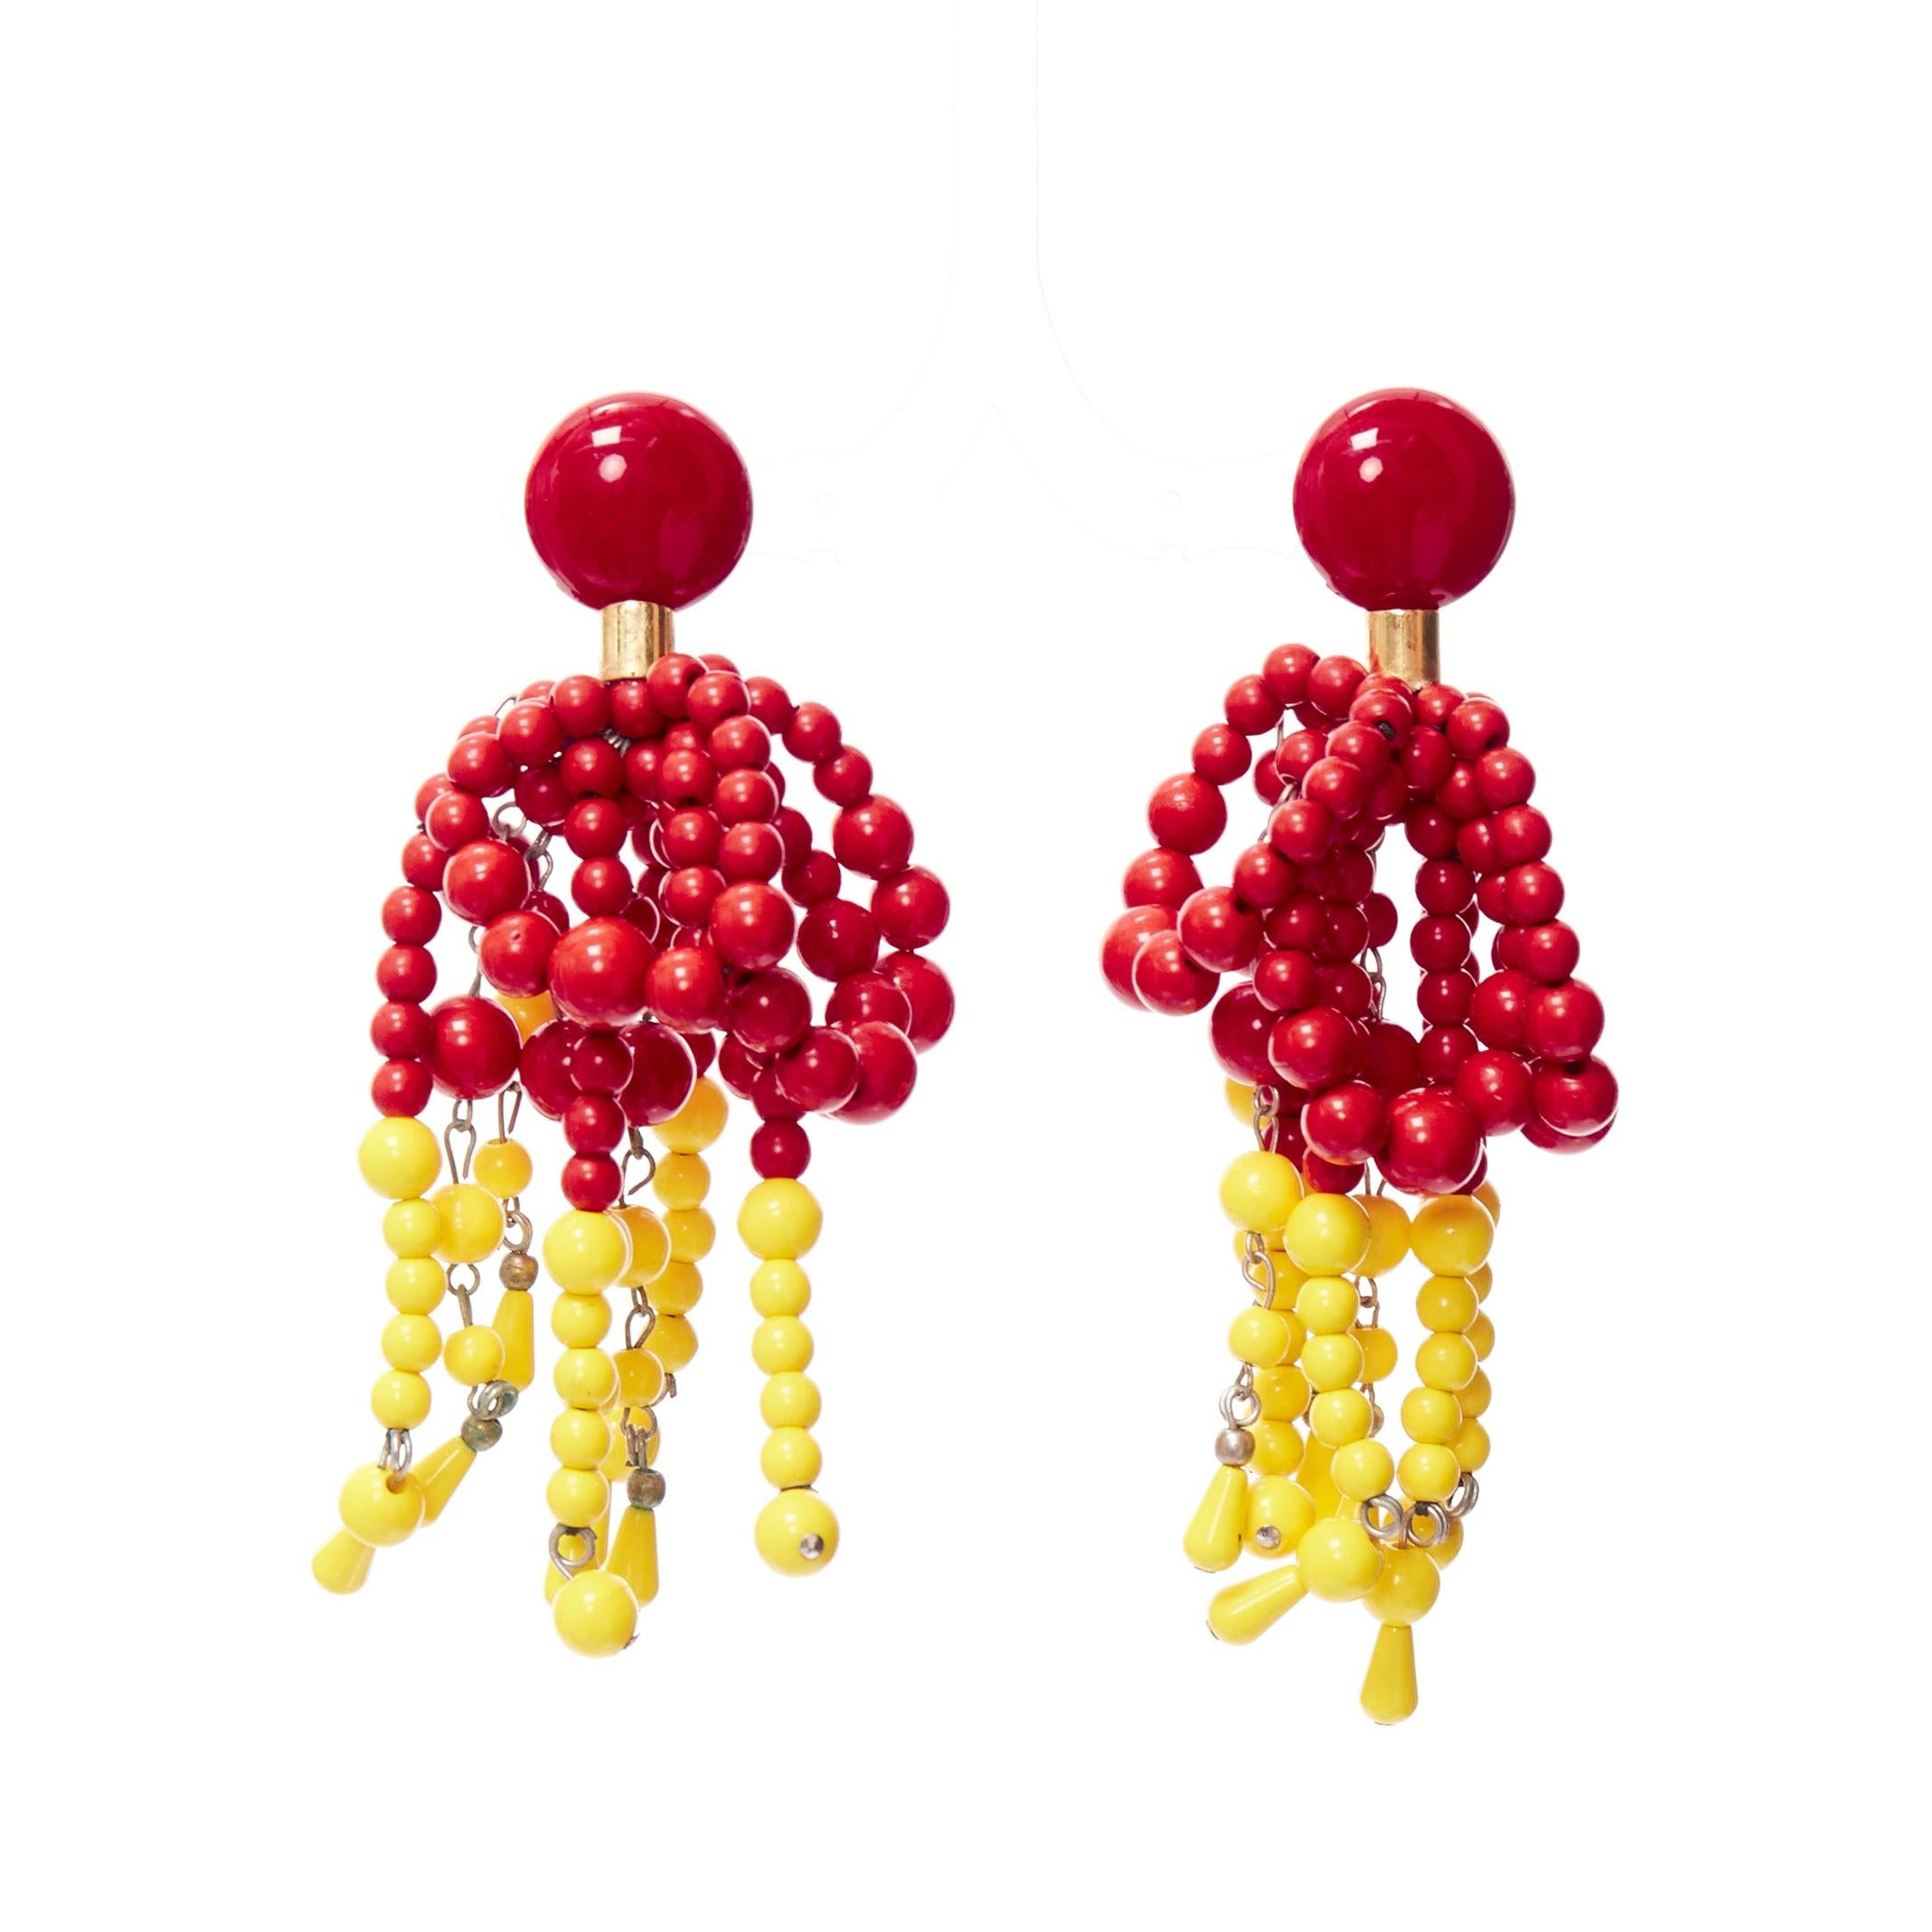 MARNI red yellow acrylic beads chandelier statement clip on earrings
Reference: AAWC/A01227
Brand: Marni
Material: Acrylic
Color: Yellow, Red
Pattern: Solid
Closure: Clip On
Lining: Gold Metal

CONDITION:
Condition: Very good, this item was